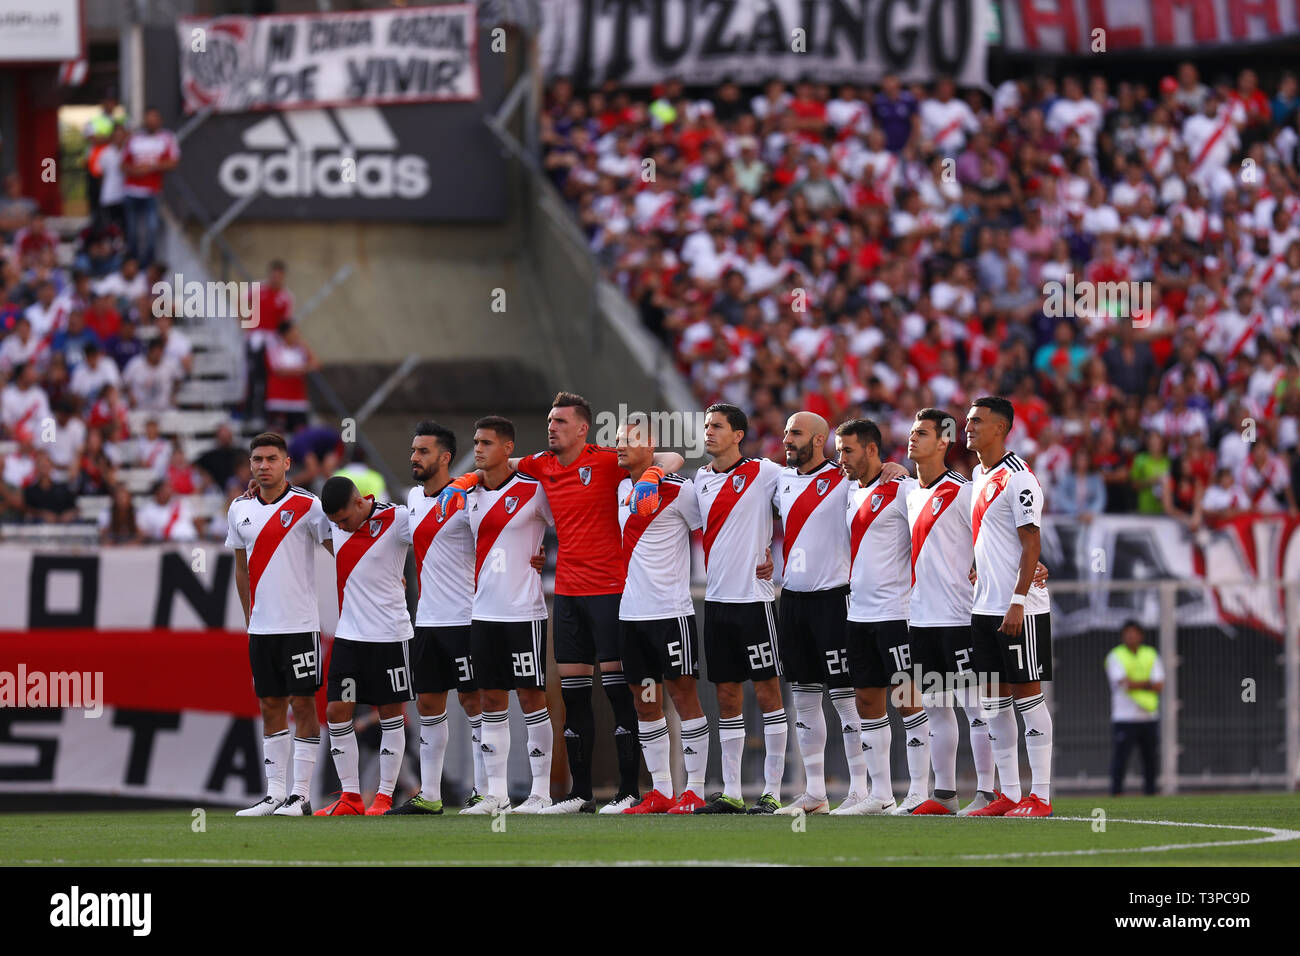 River Plate football club team formation in Buenos Aires, Argentina Stock Photo